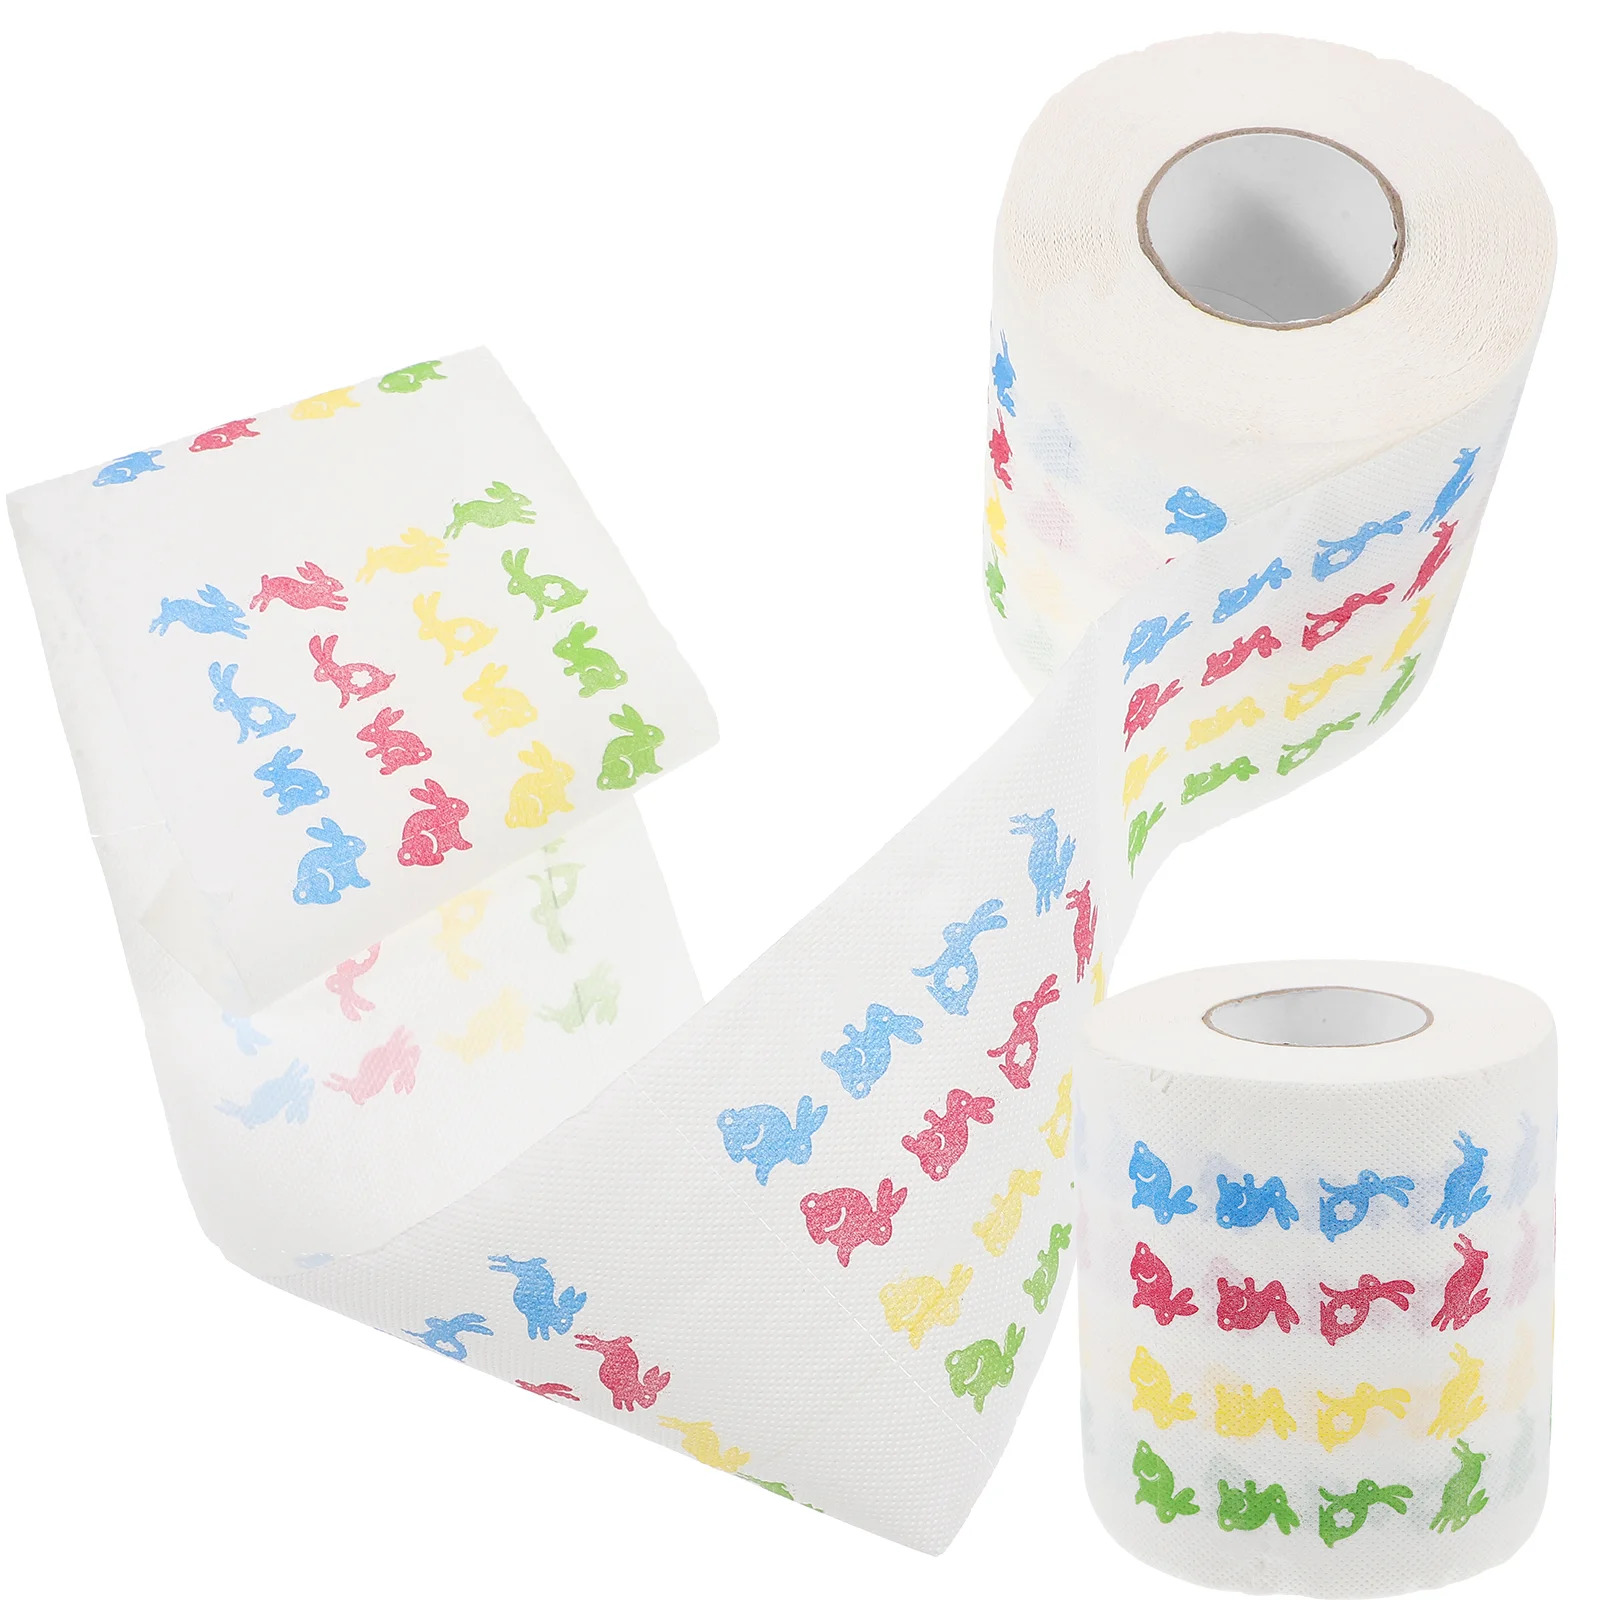 

Toilet Paper Easter Rabbits Eggs Shape Tissue Paper Towel Bathroom Home Office Toilet Paper Themed Party Supplies